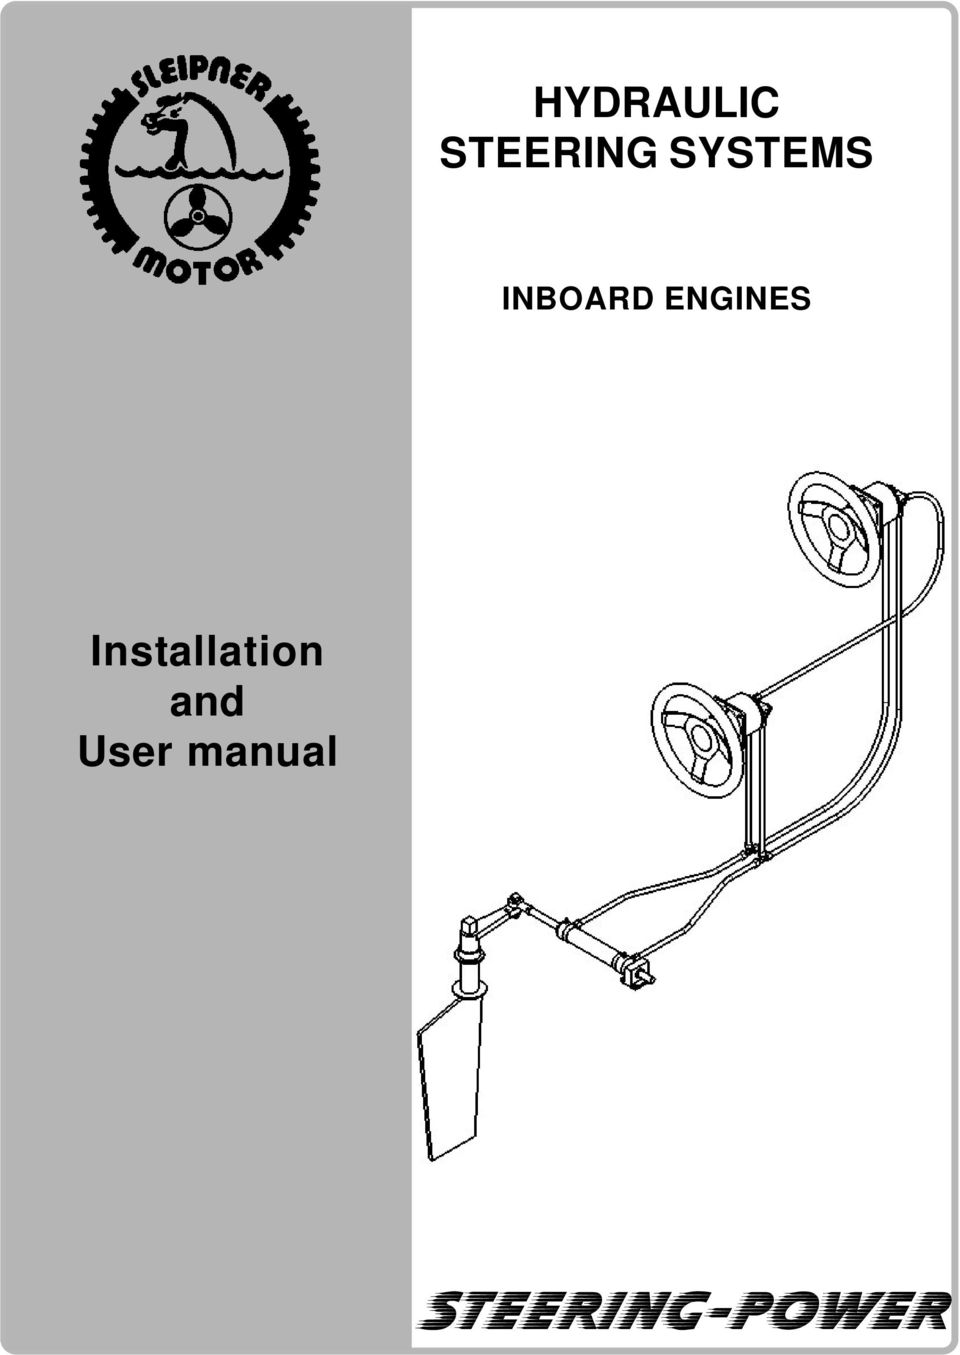 and User manual